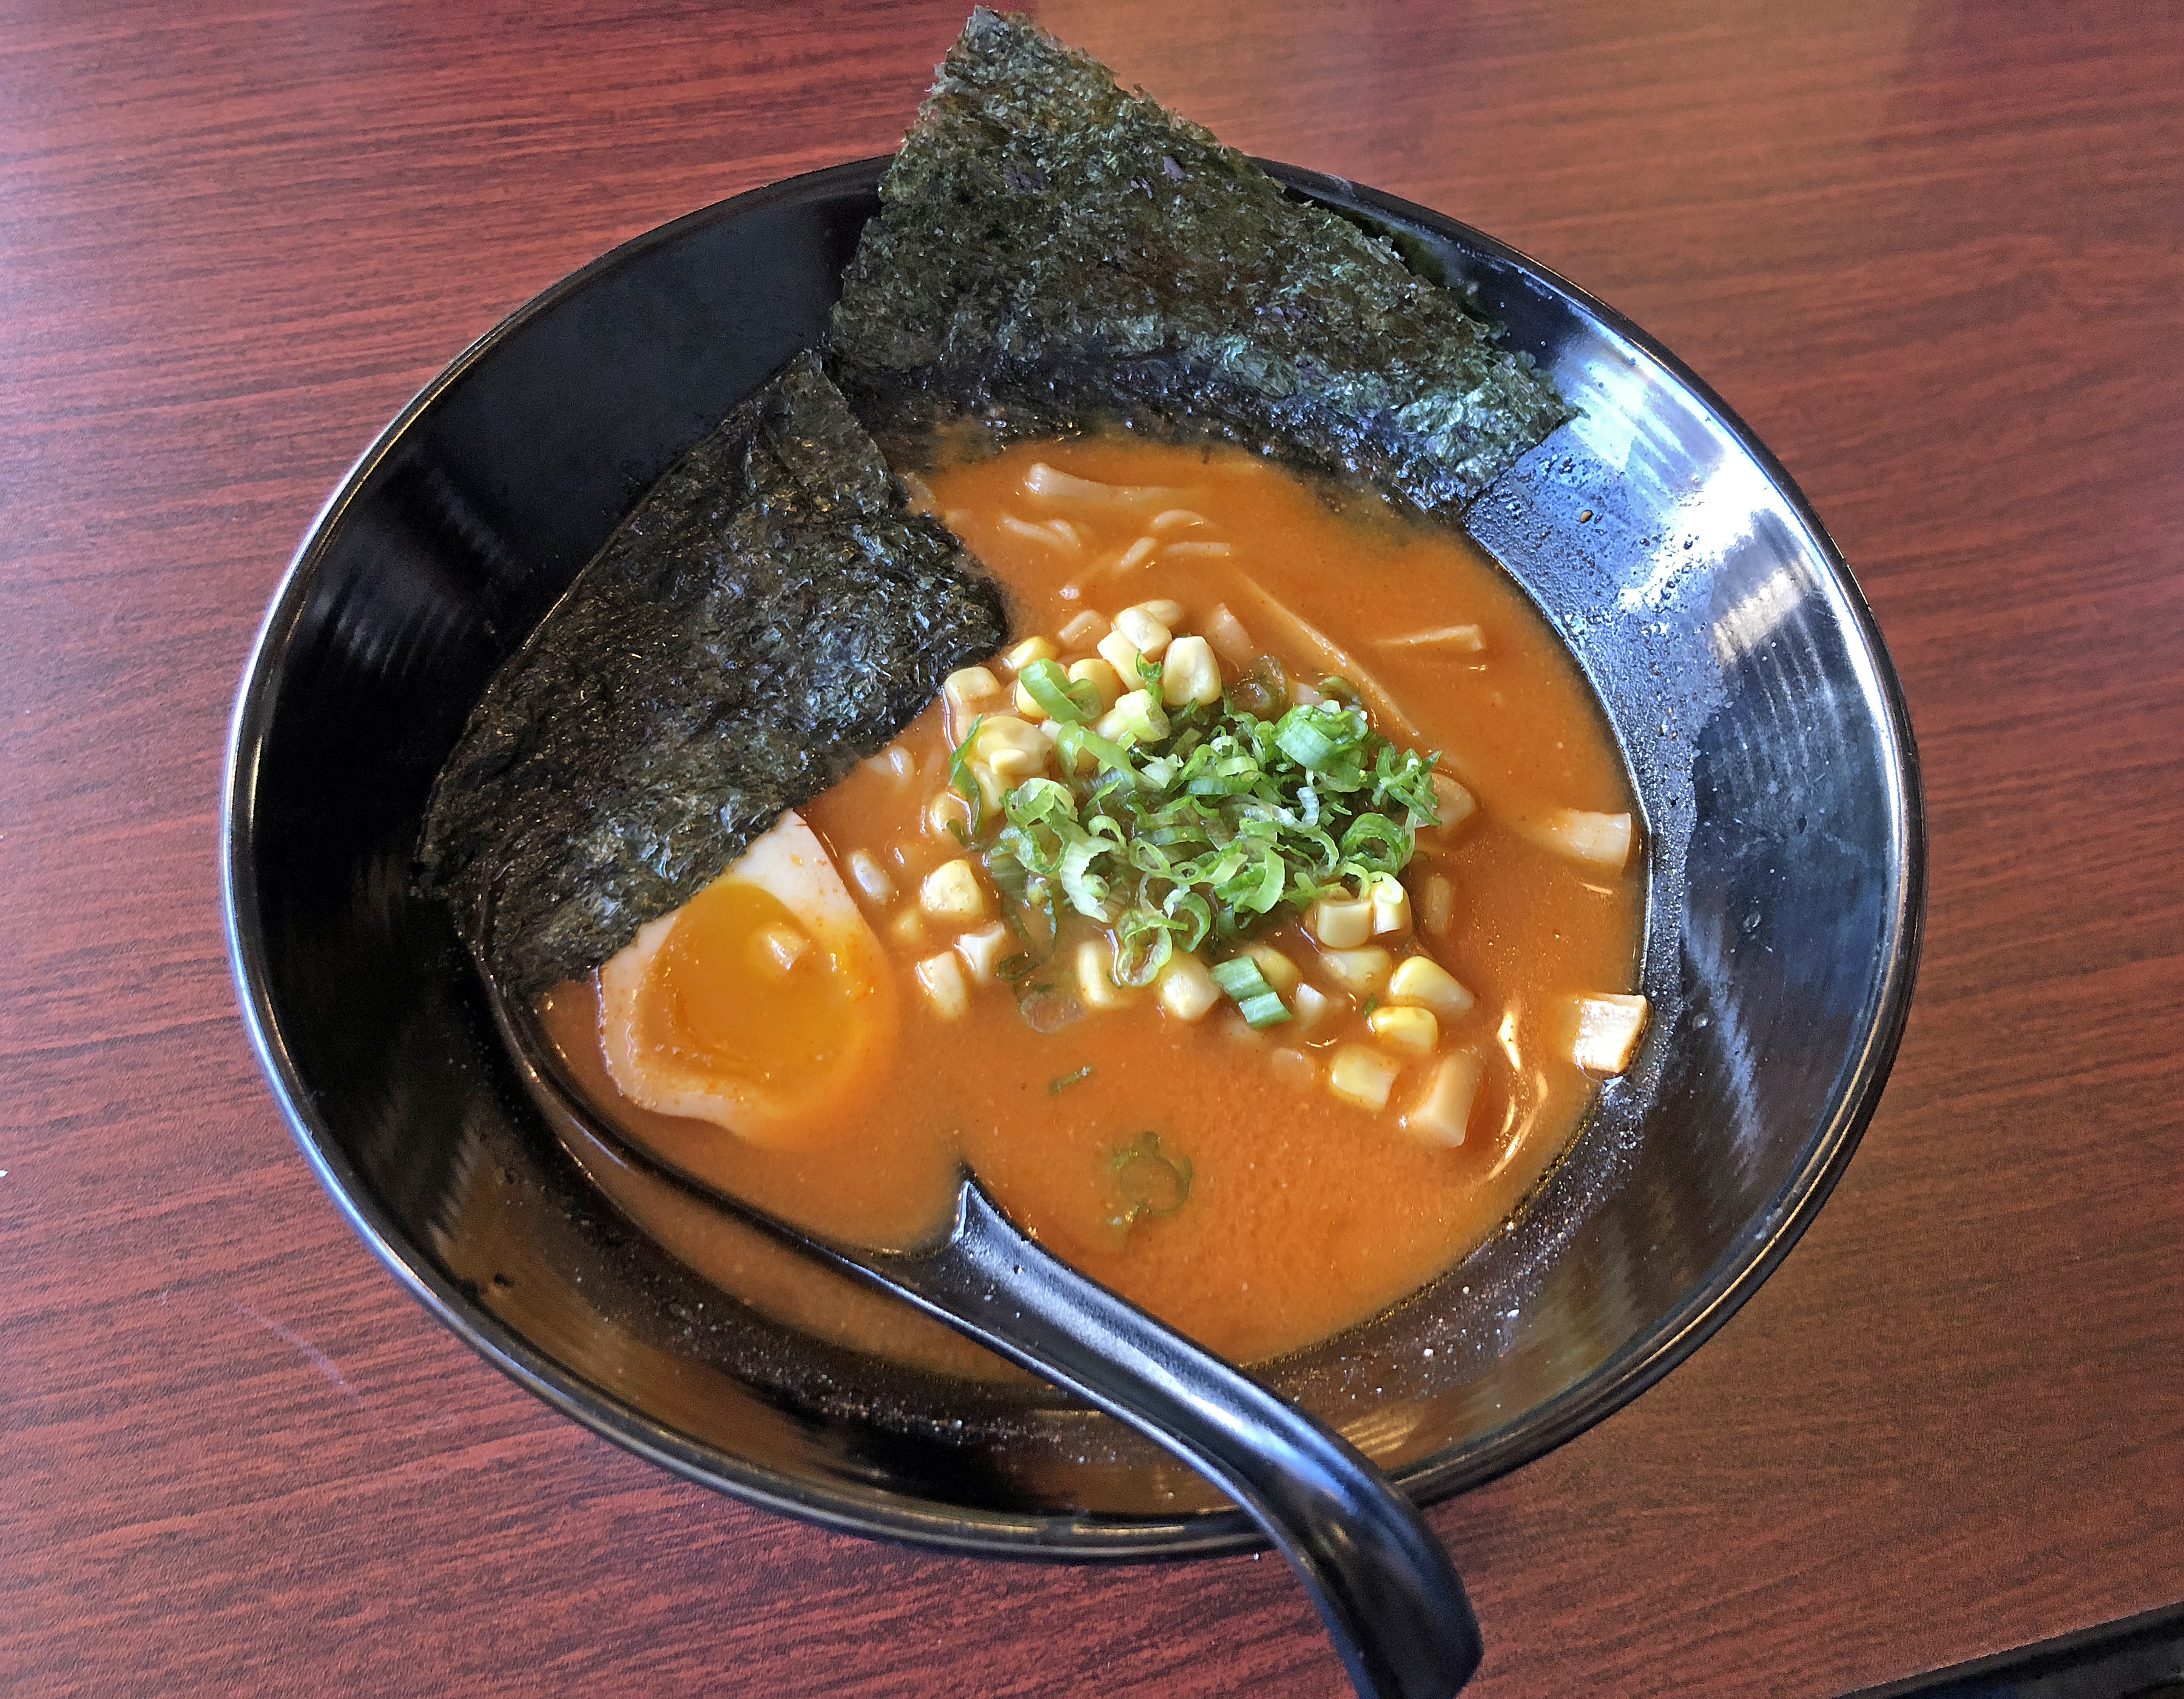 Ramen Inochi’s spicy veggie miso ramen is fiery and delicious, especially with an added order of kimchi.